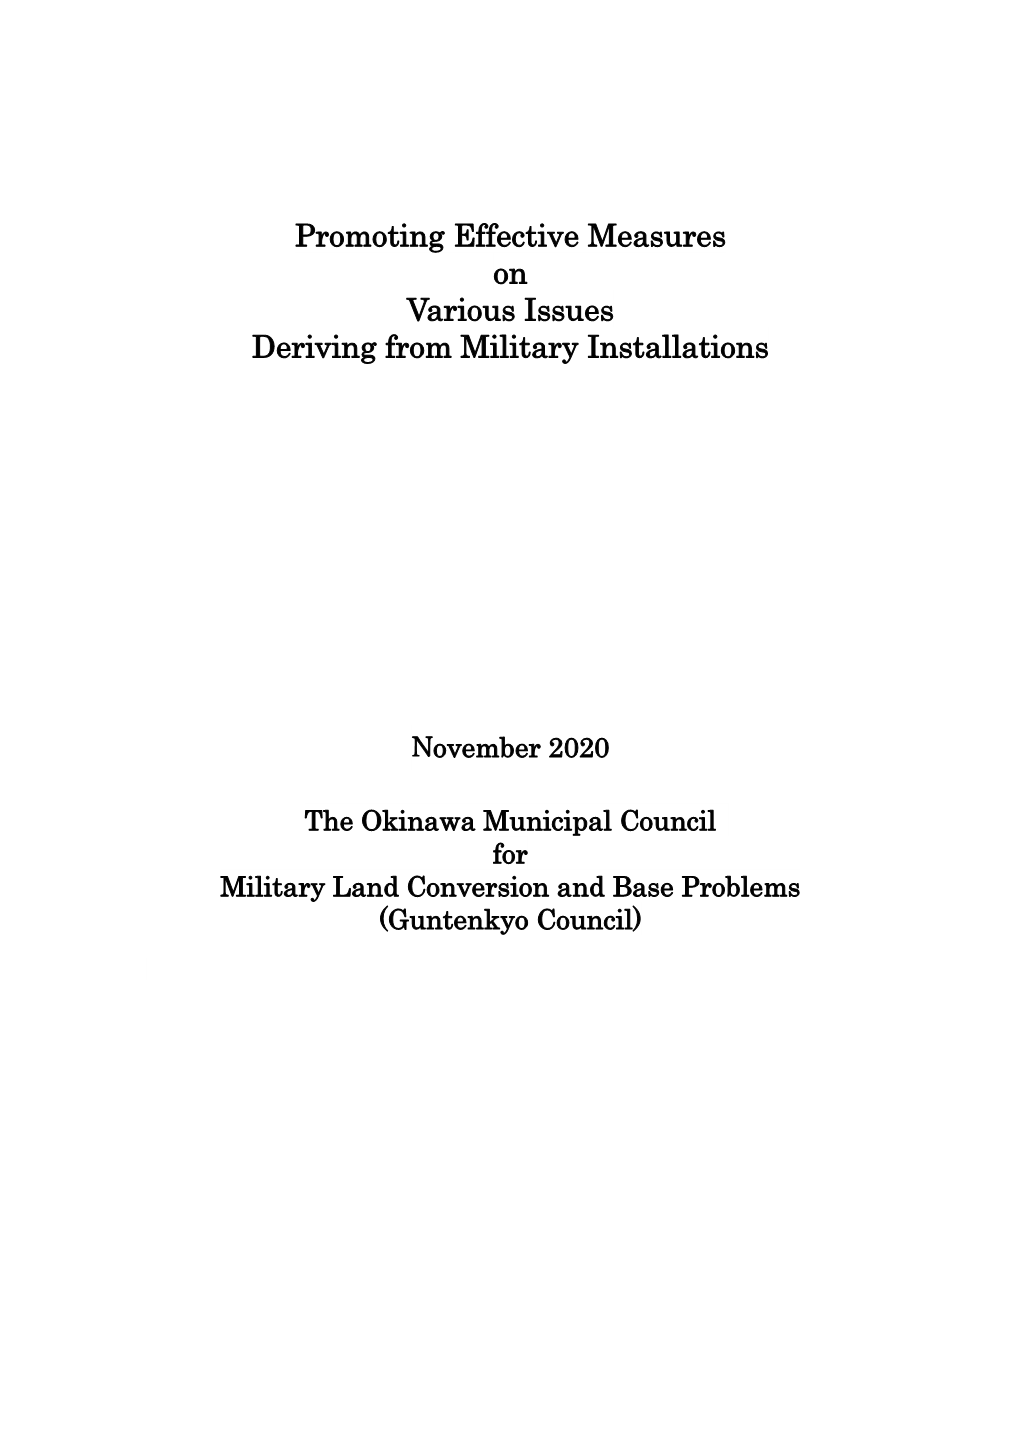 Promoting Effective Measures on Various Issues Deriving from Military Installations